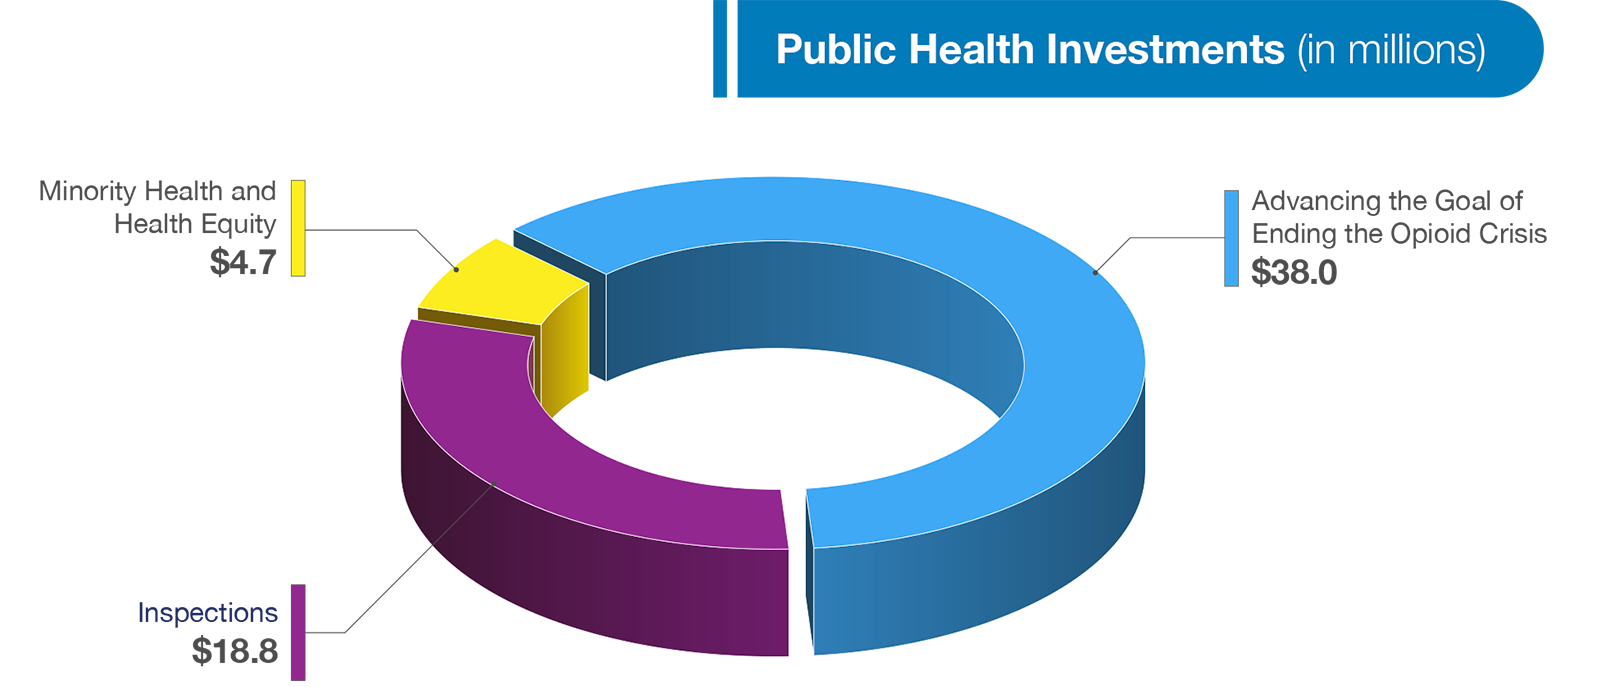 Pie chart of public health investments with Advancing the Goal of Ending the Opioid Crisis at $38.0 million, Inspections at $18.8 million, Minority Health and Health Equity at $4.7 million.